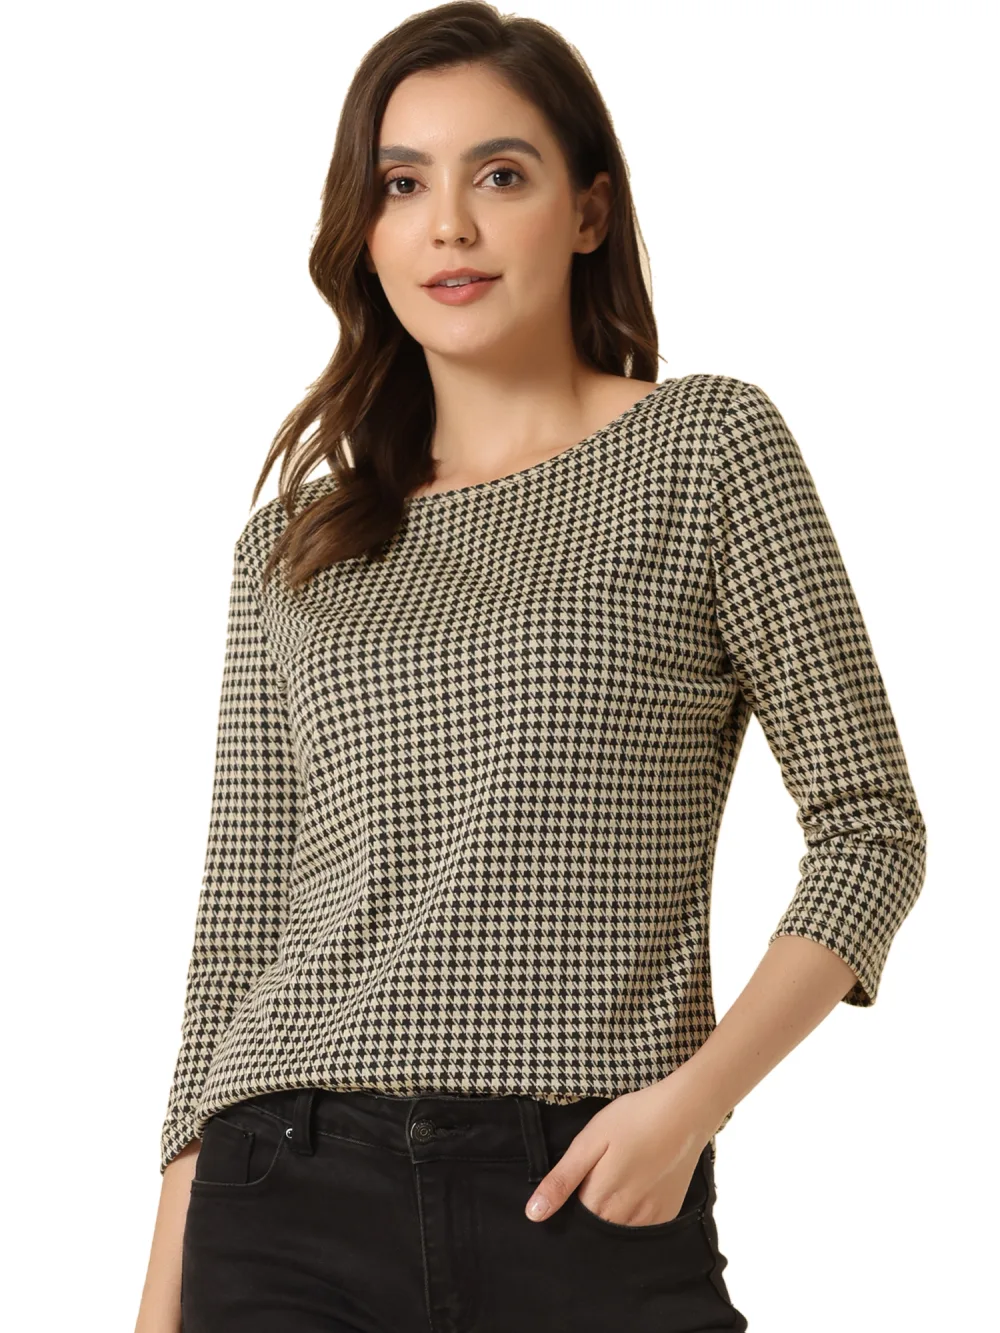 Allegra K- Houndstooth Plaid Top 3/4 Sleeve Boat Neck Blouse